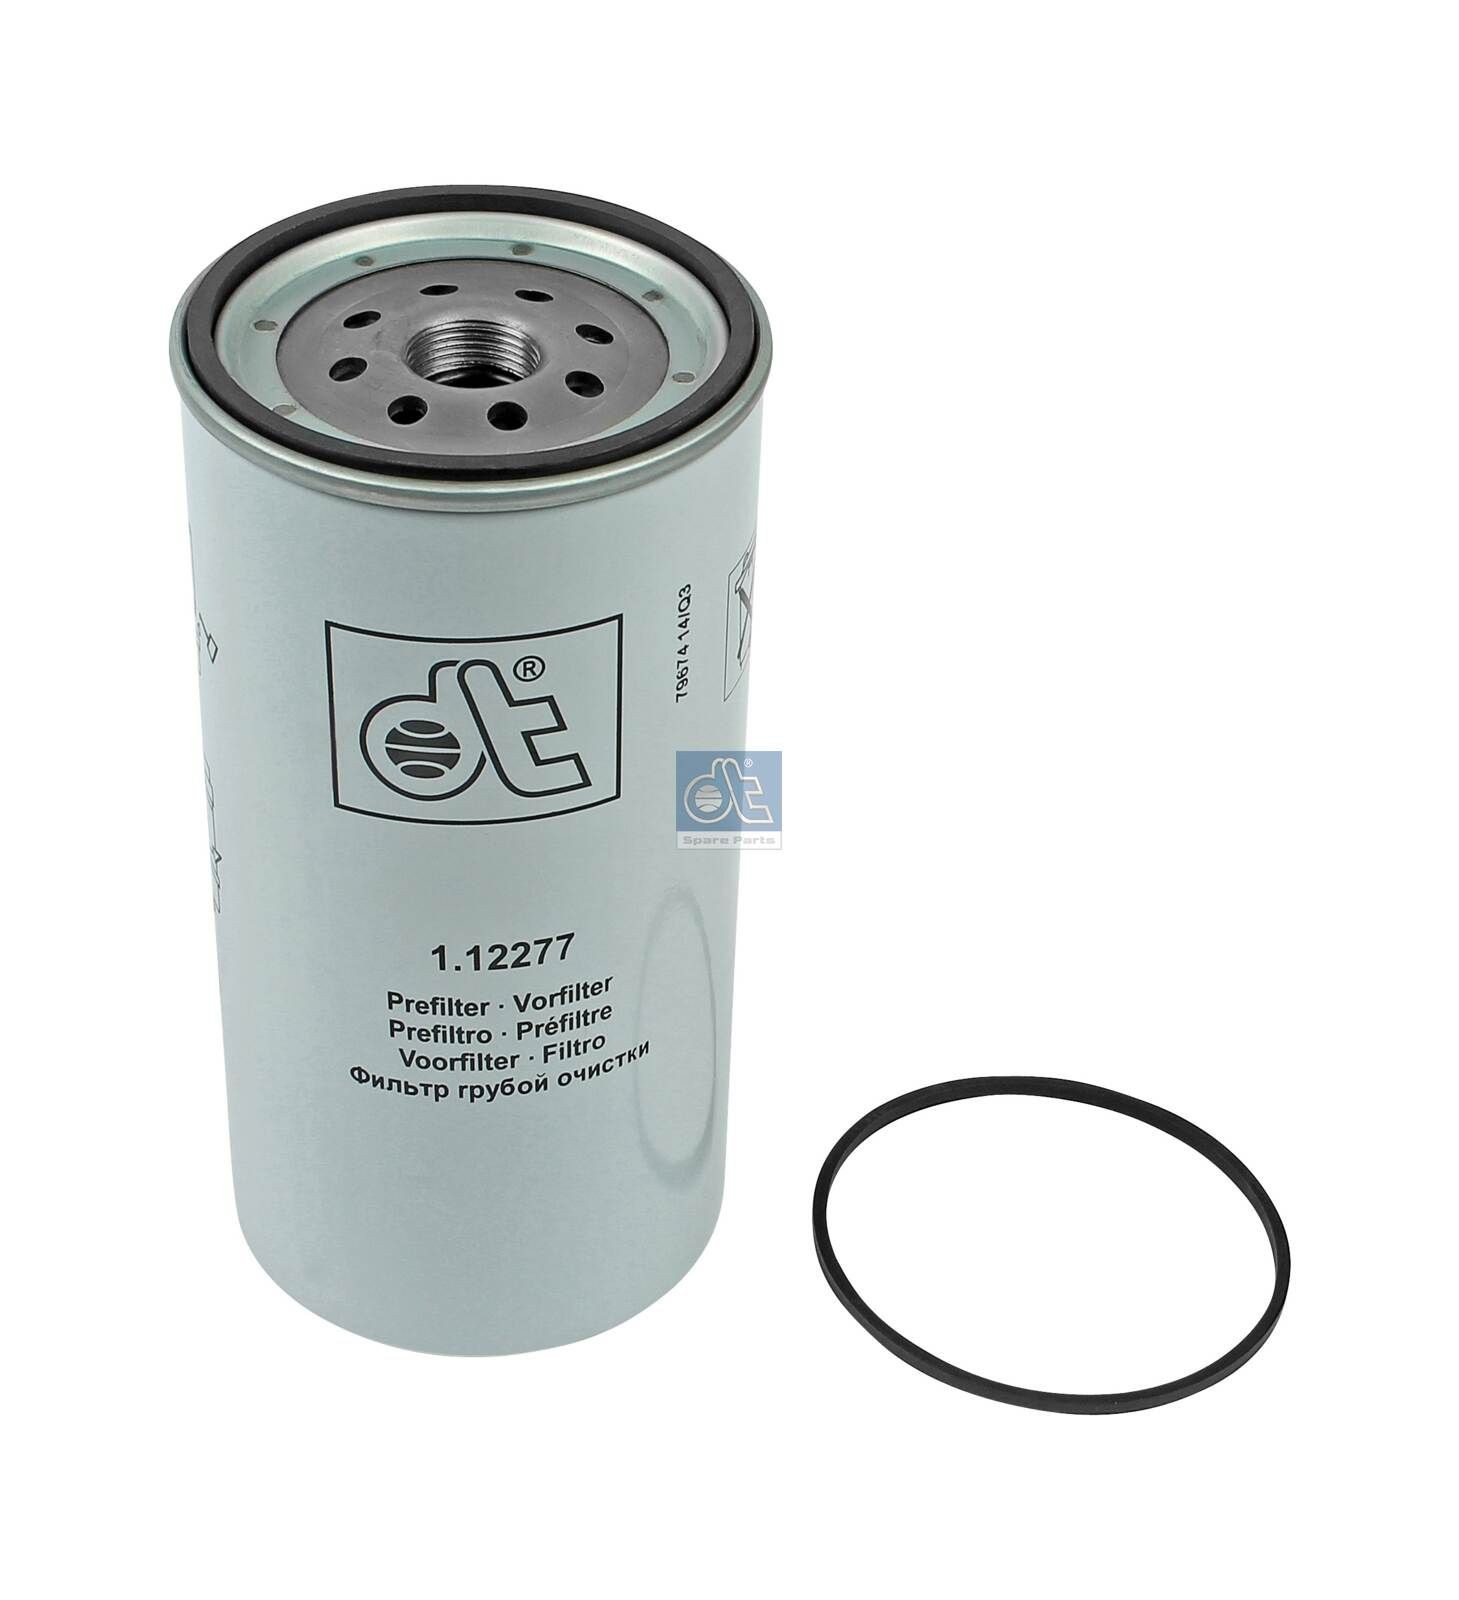 WK 1080/6 x DT Spare Parts 1.12277 Fuel filter 7424993624